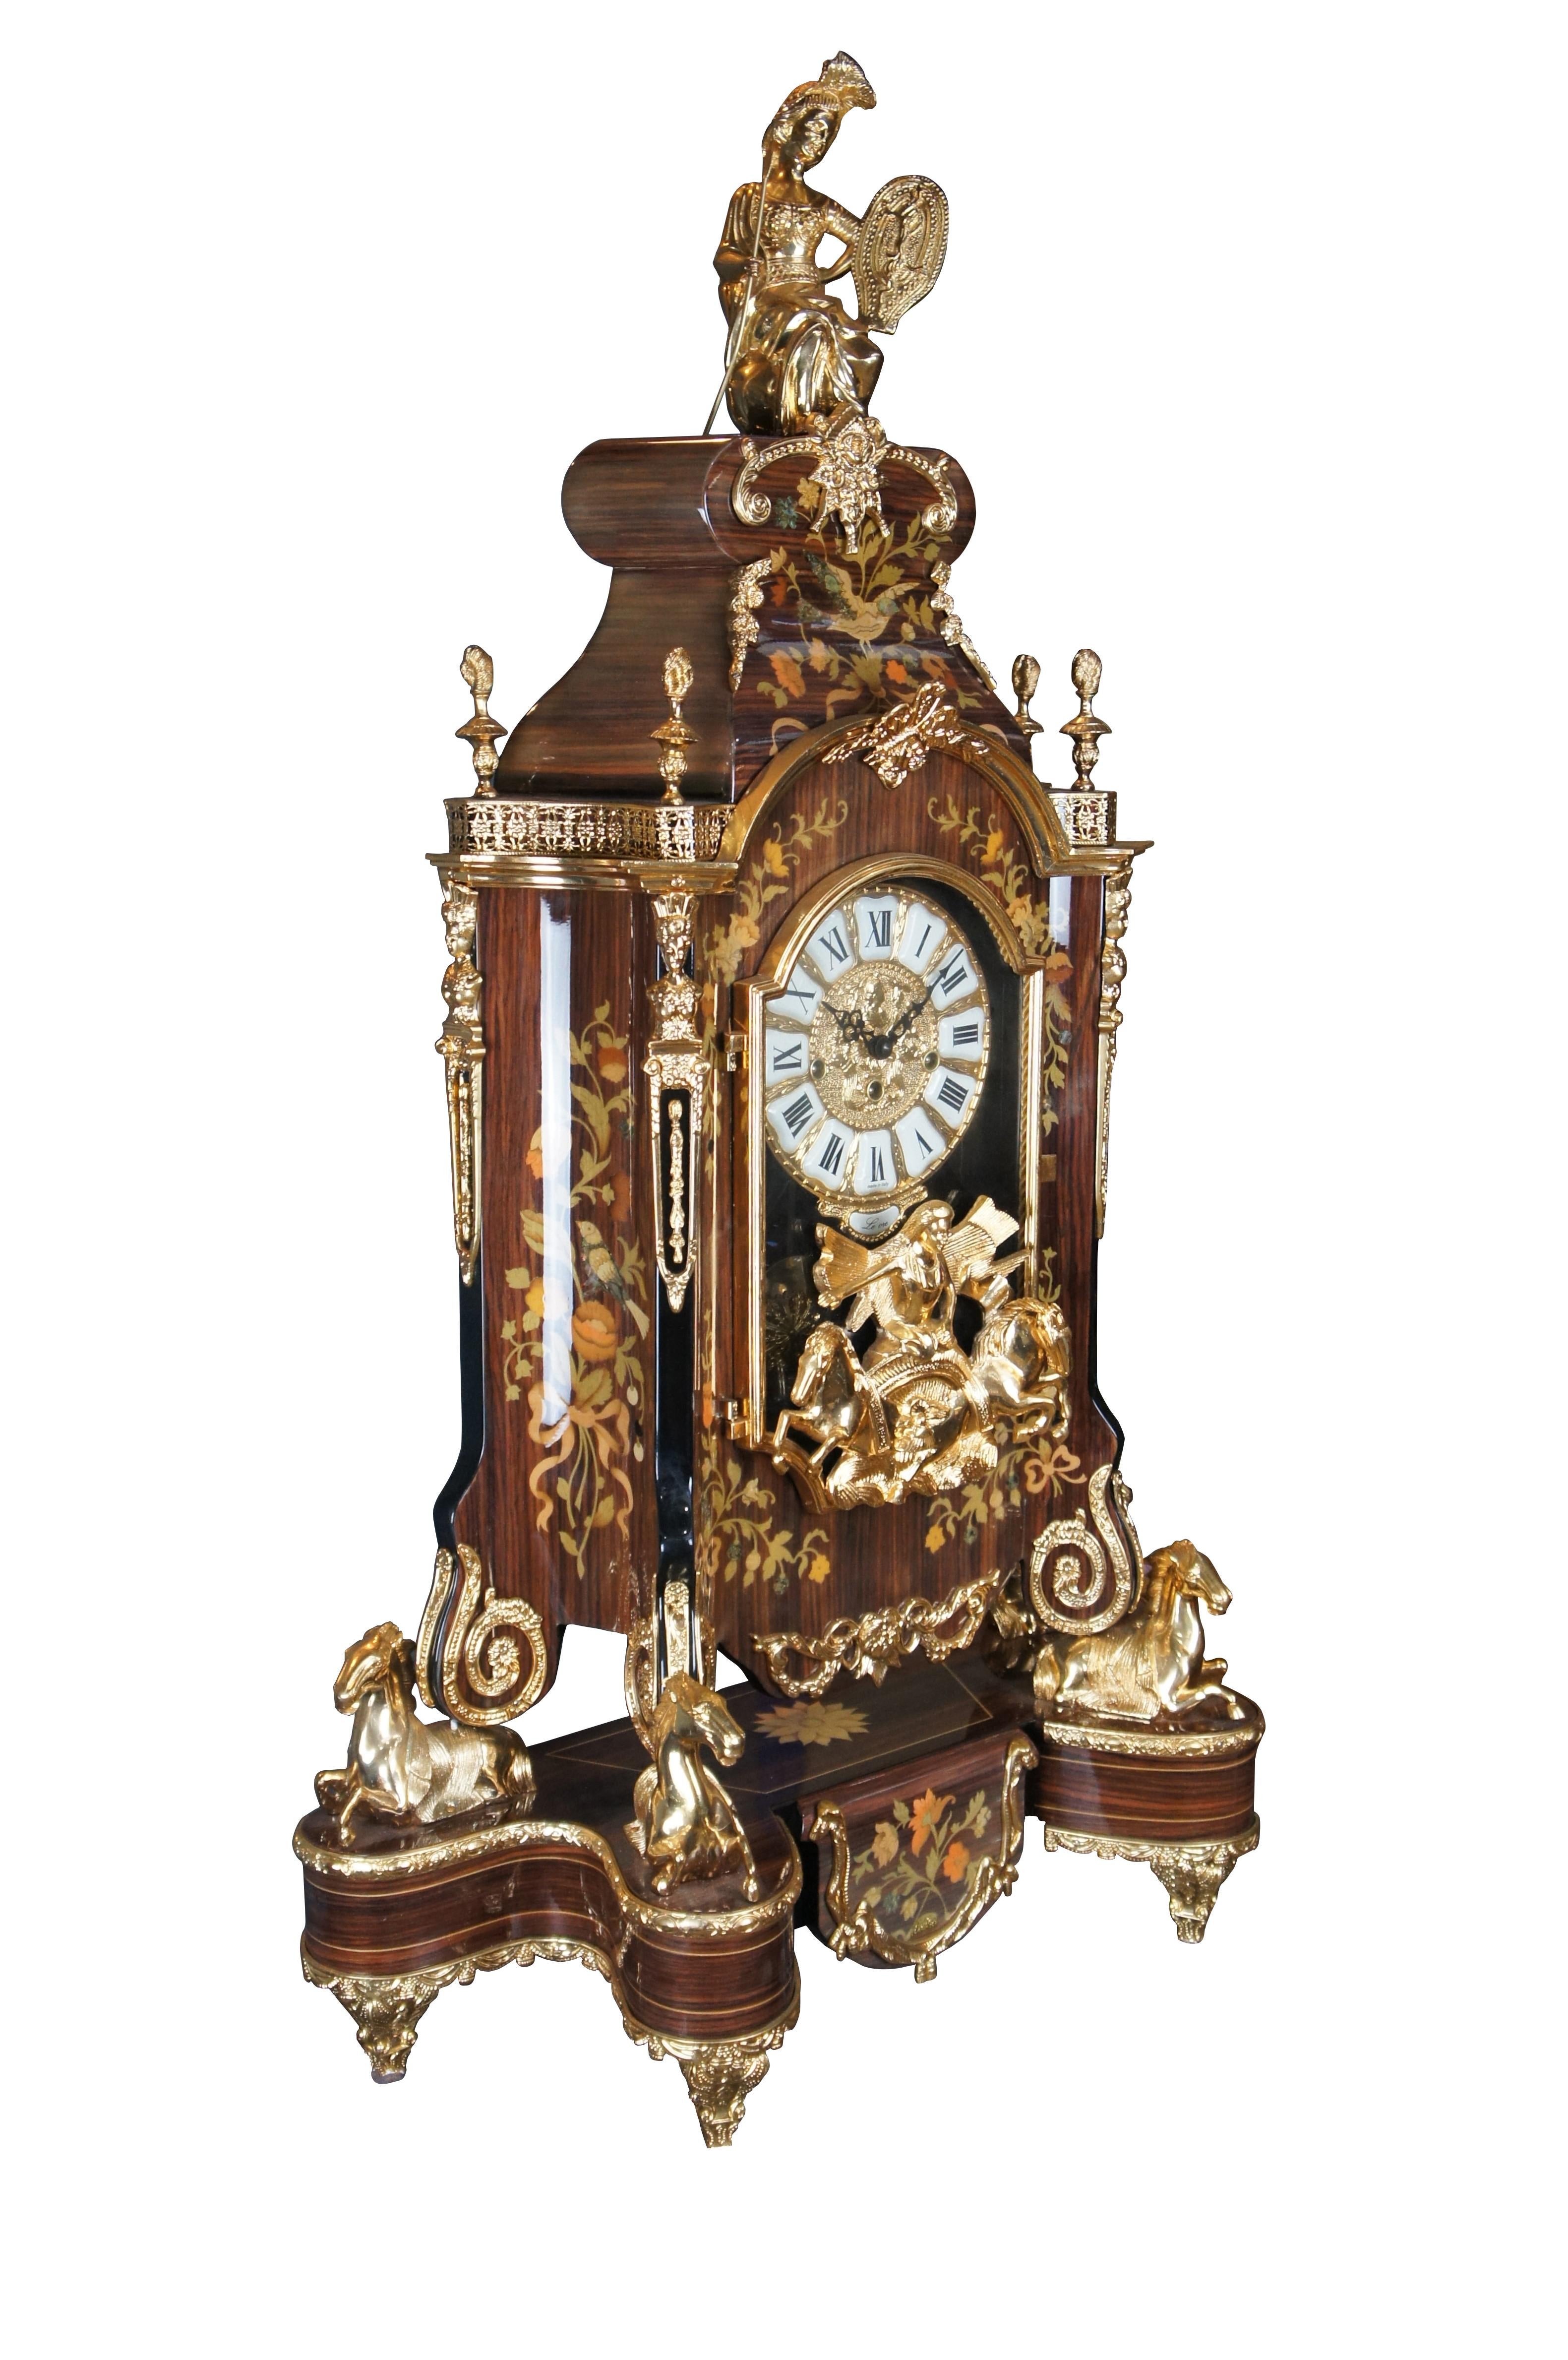 Stunning Italian Boulle style mantel clock by Le Ore New Art International. Le Ore is a small Italian family manufacturer that specializes in intricate and colorful wood inlay. Features large mounted sculptures and heavy gold plated cast brass